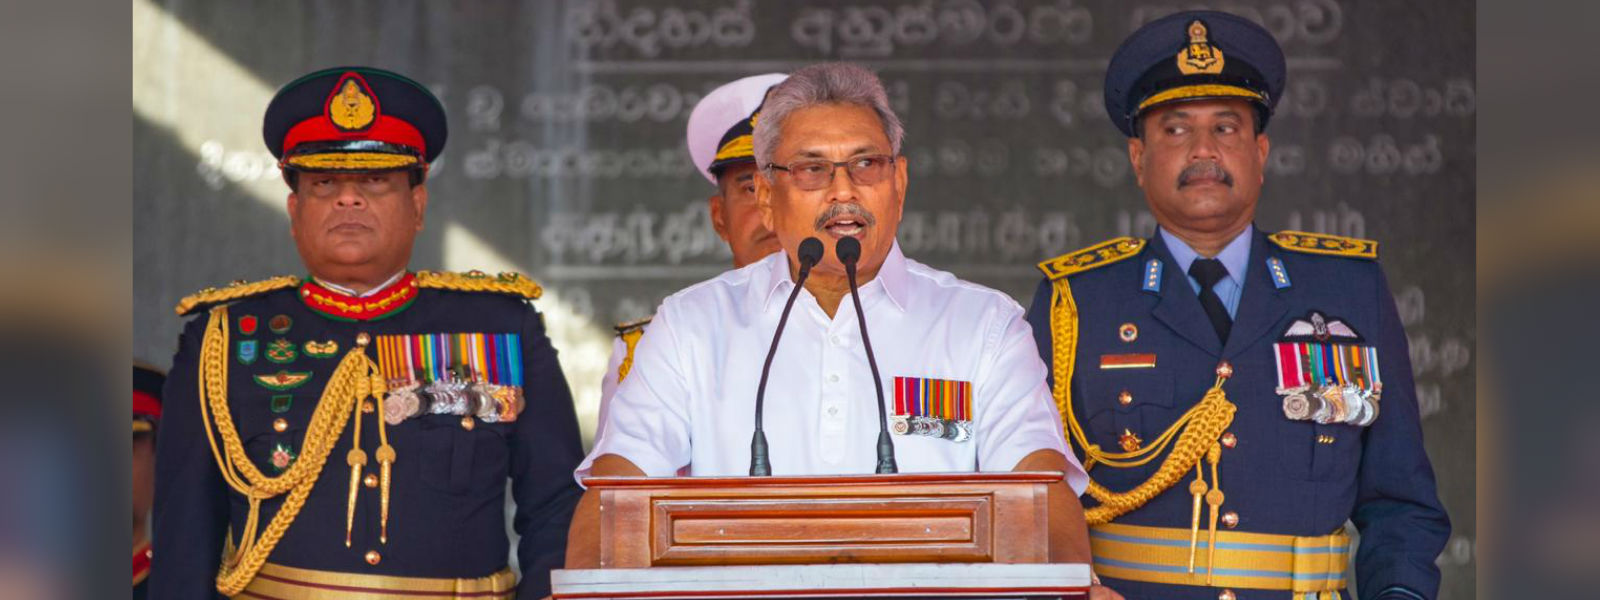 President Gotabaya Rajapaksa takes aim at poverty and corruption in independence address